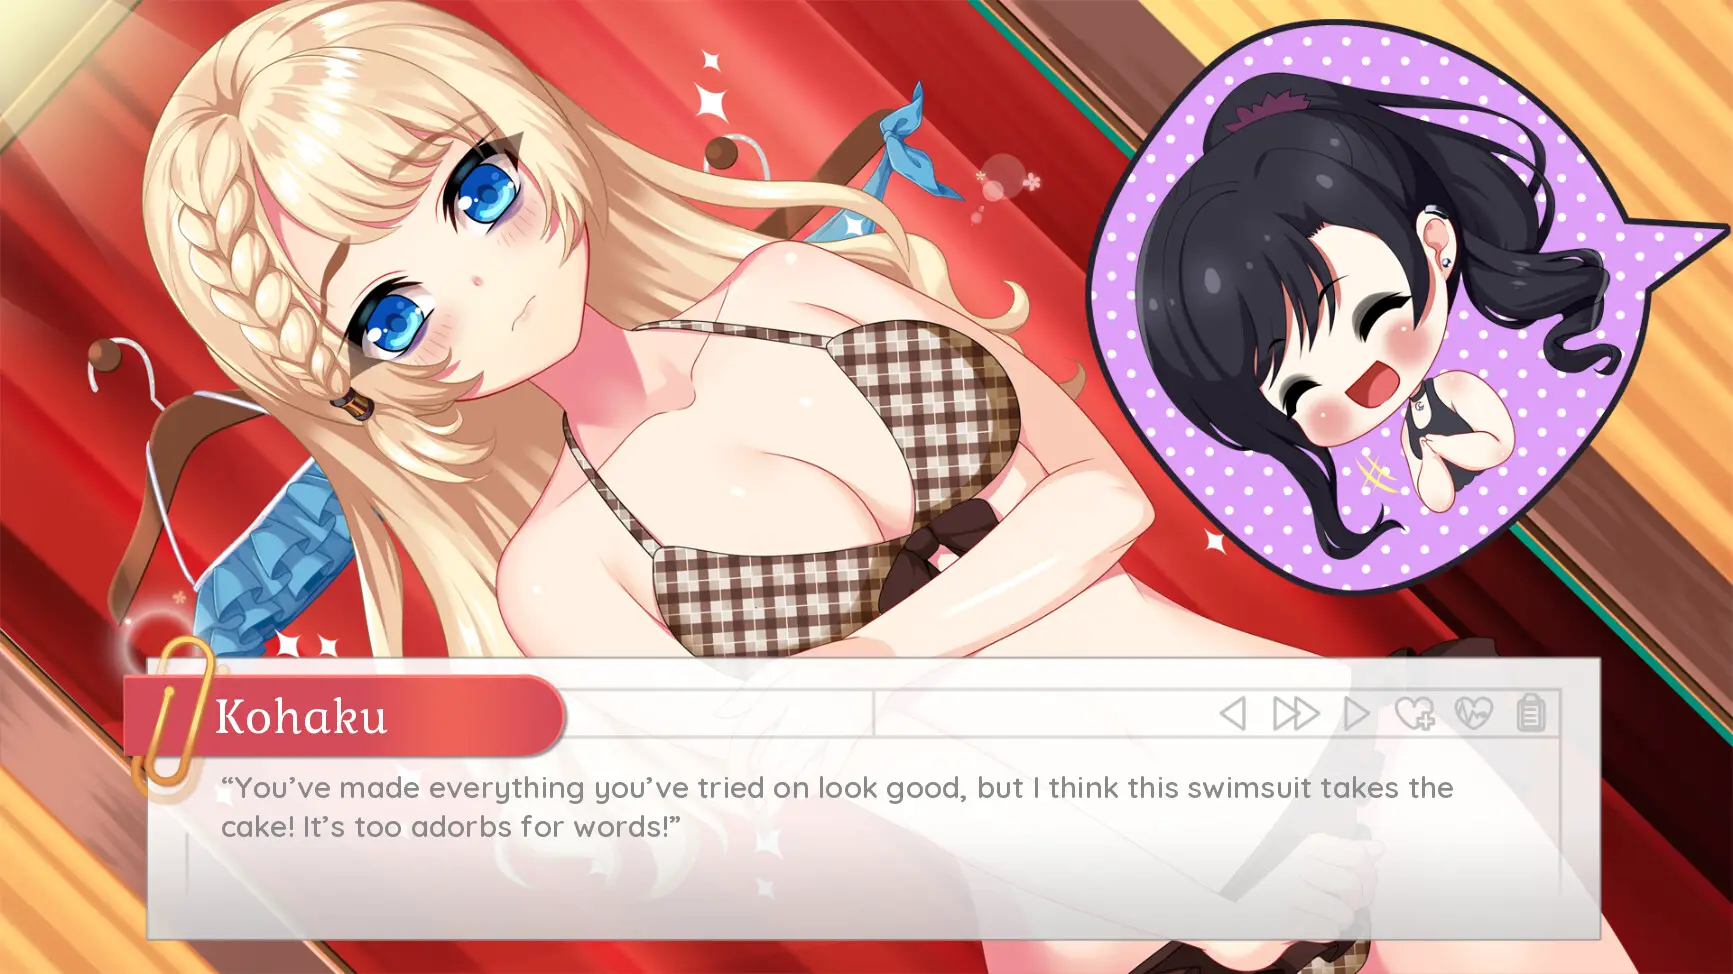 The Meaning of Life - a short NSFW web visual novel - Release Announcements  